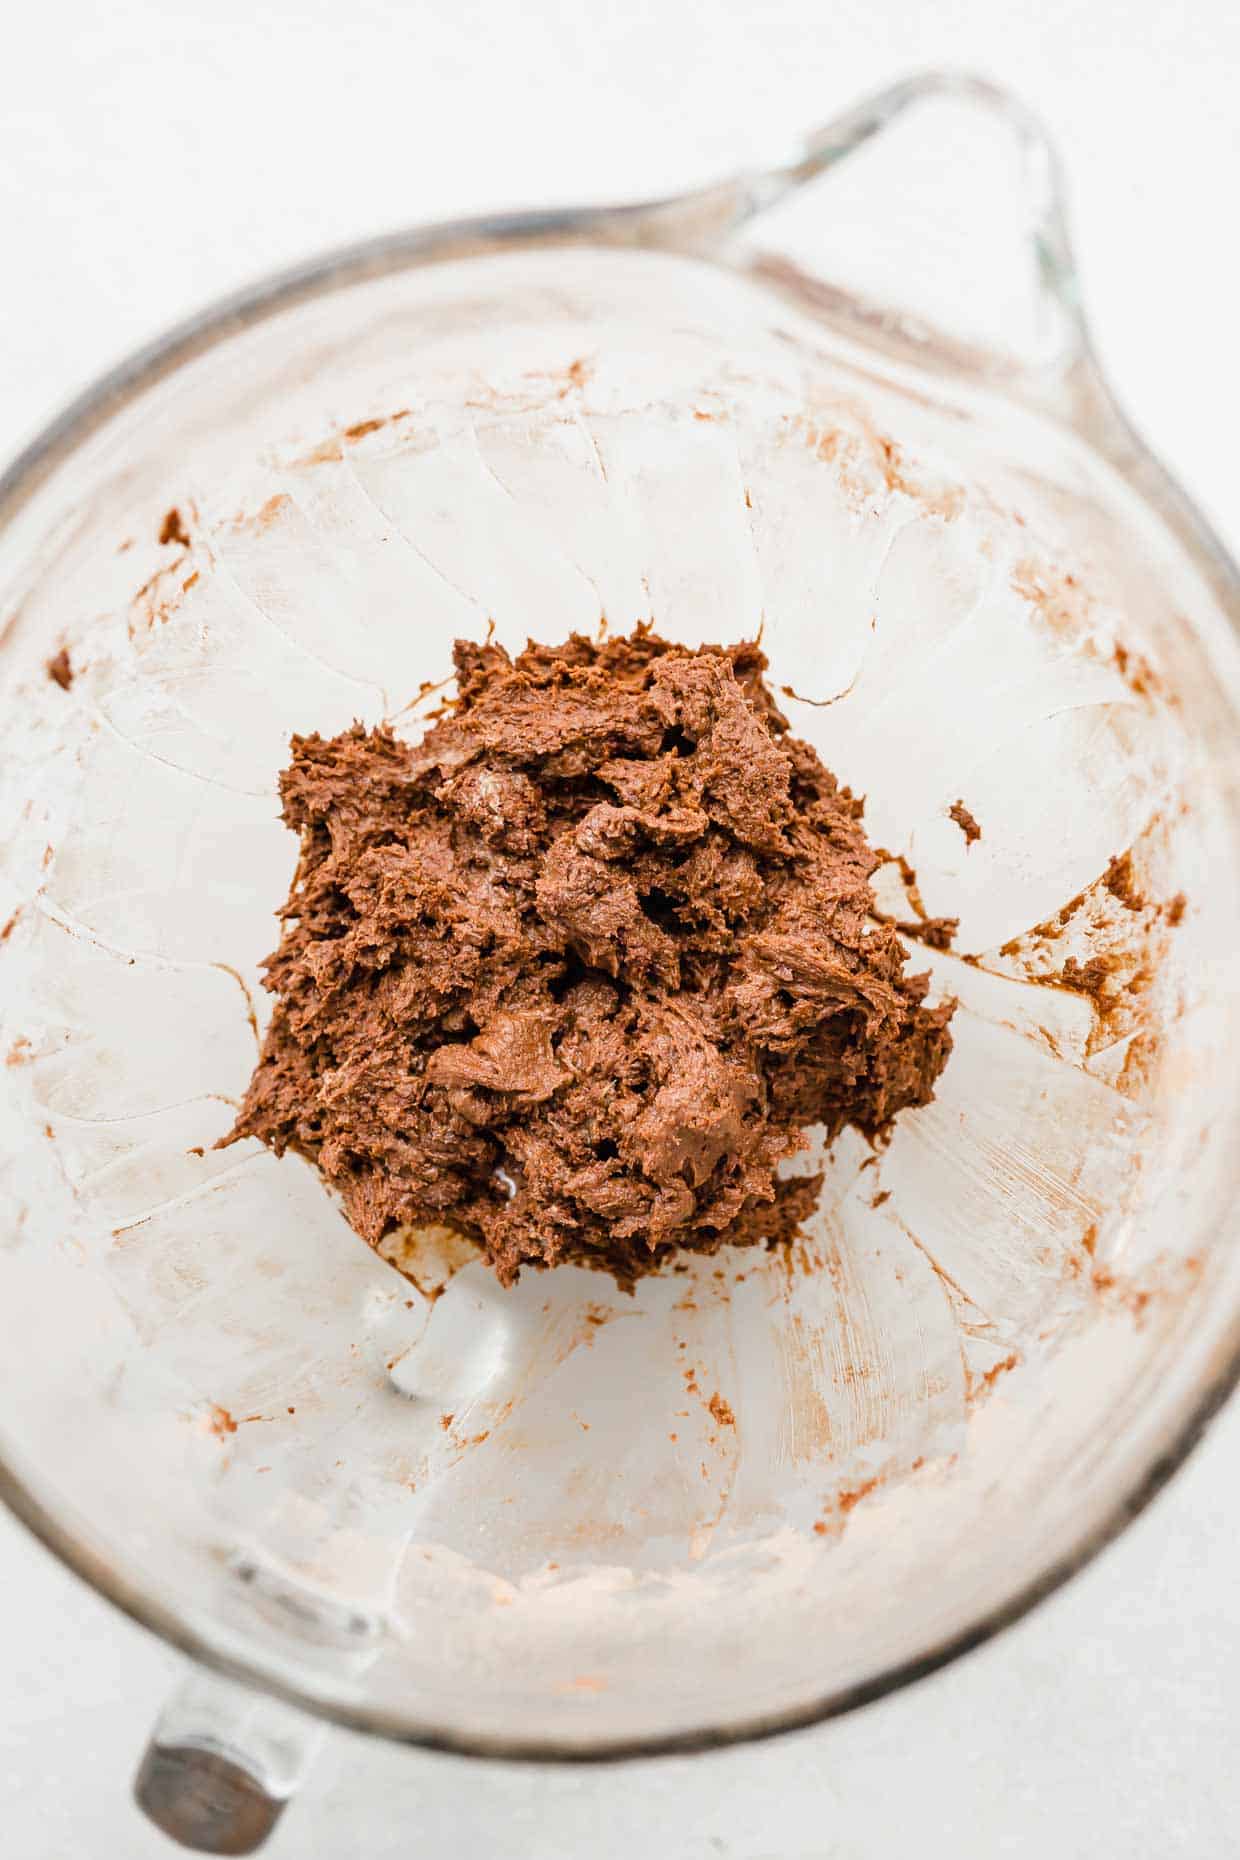 Brown chocolate turtle cookie dough in a glass mixing bowl on a white background.